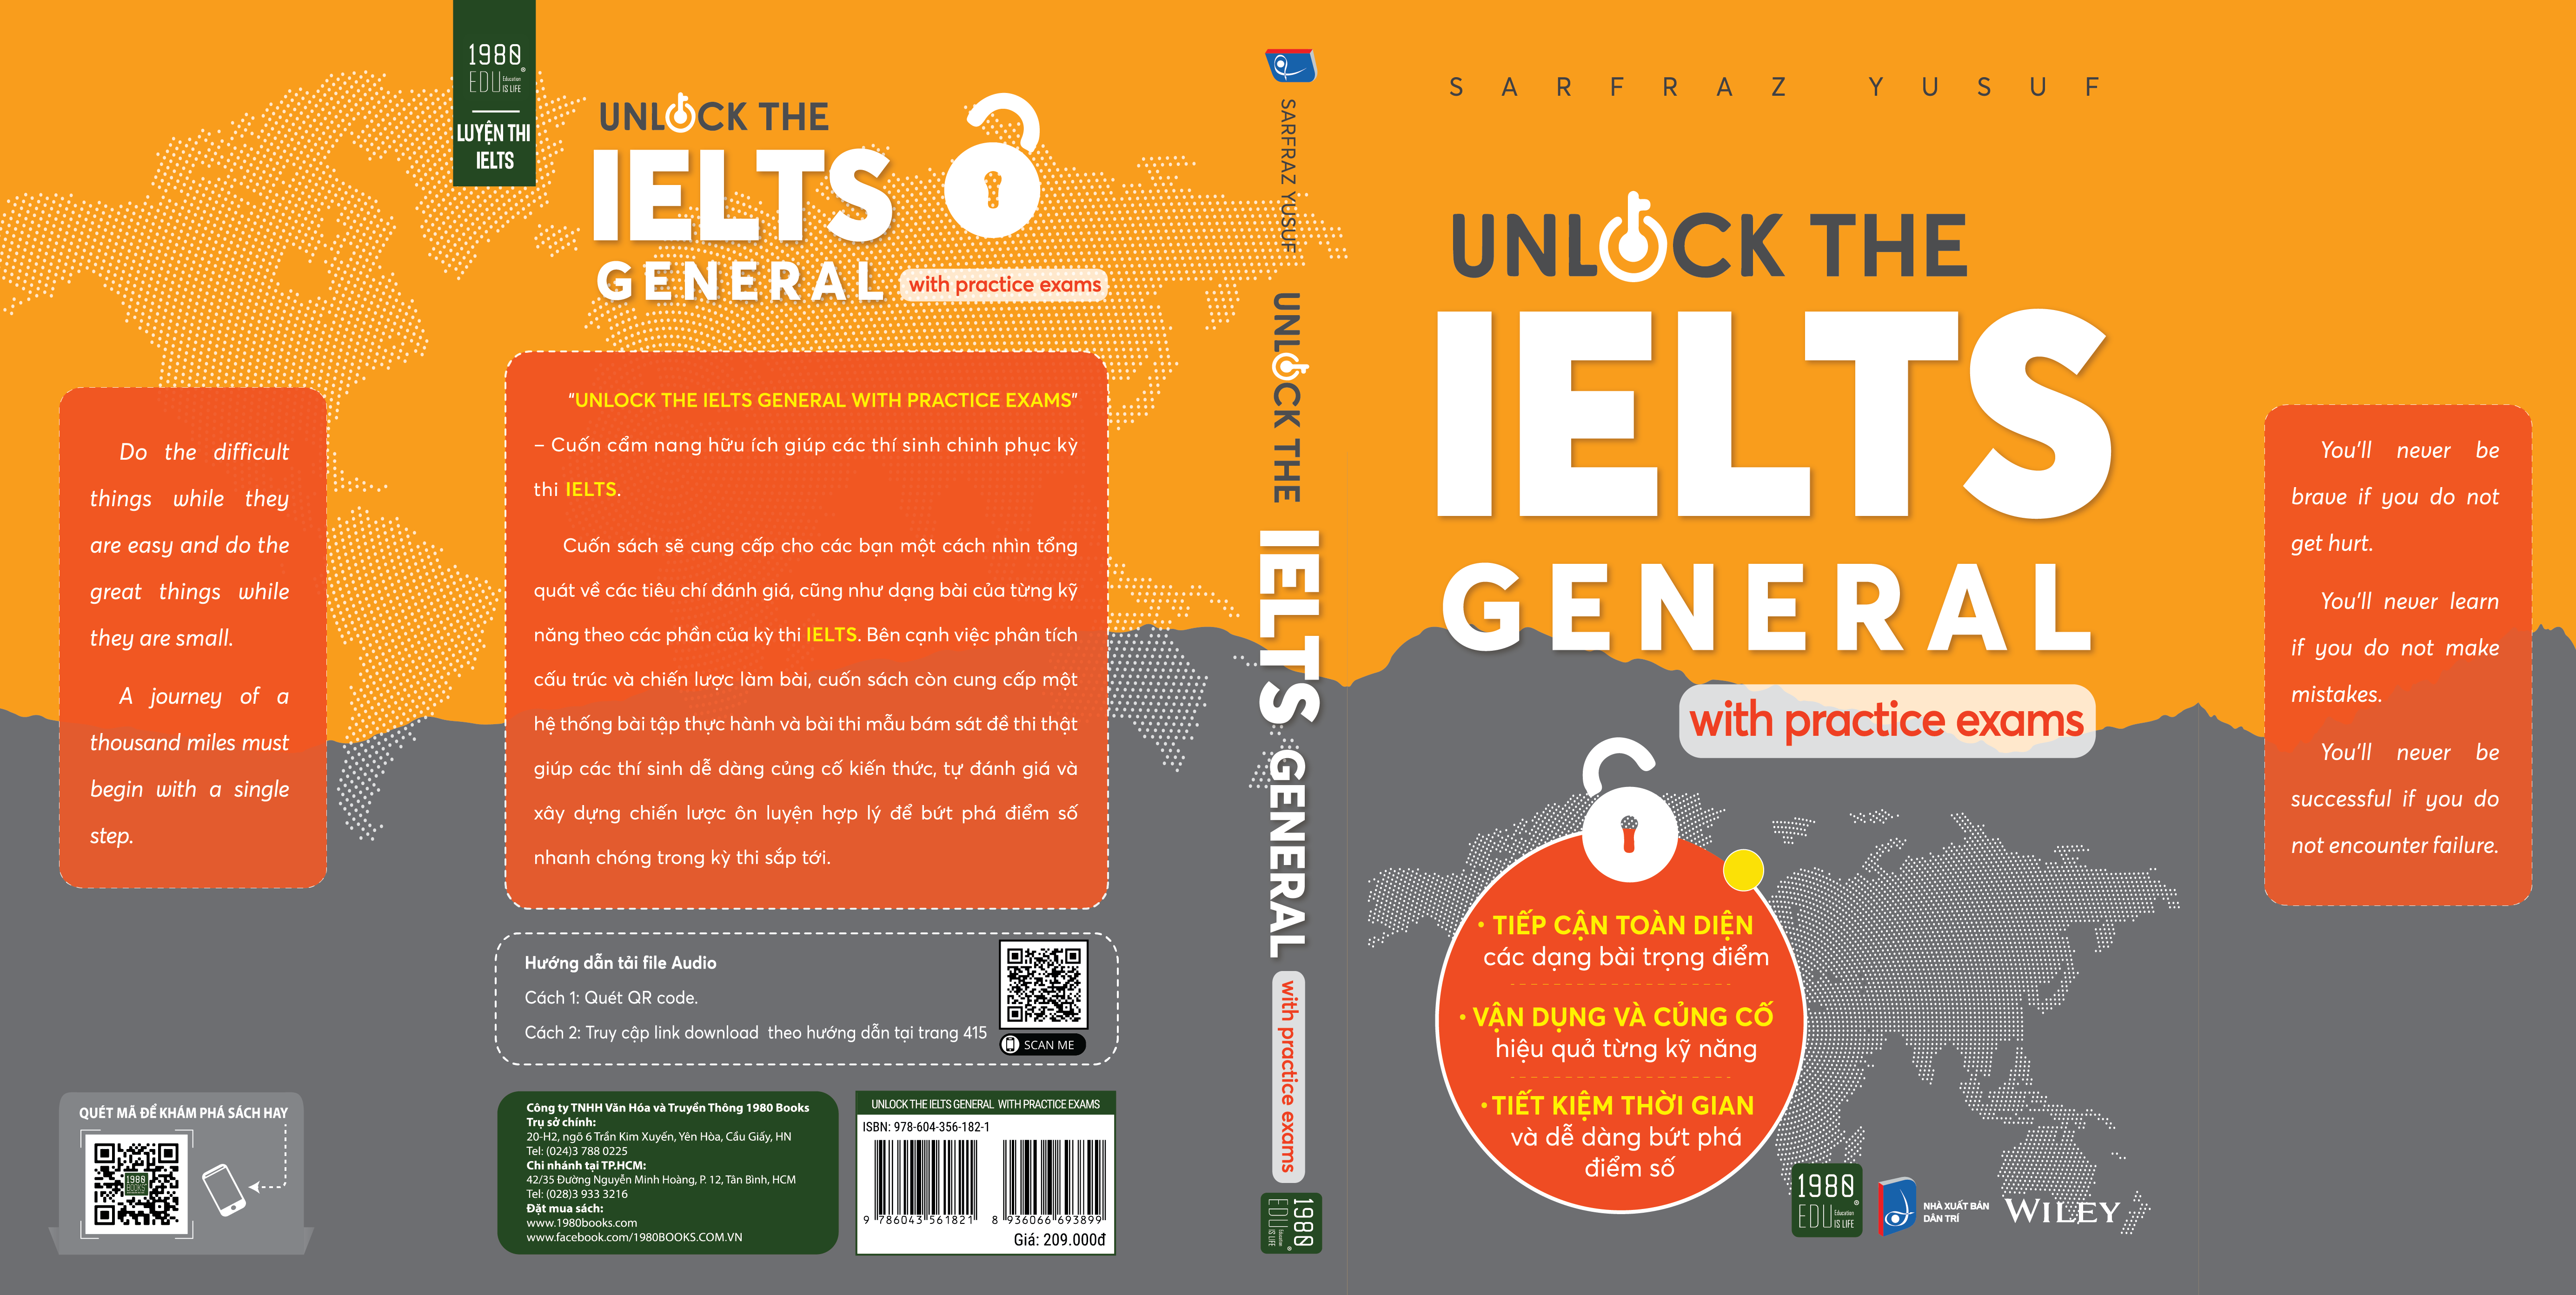 Unlock the ielts general with practice exams